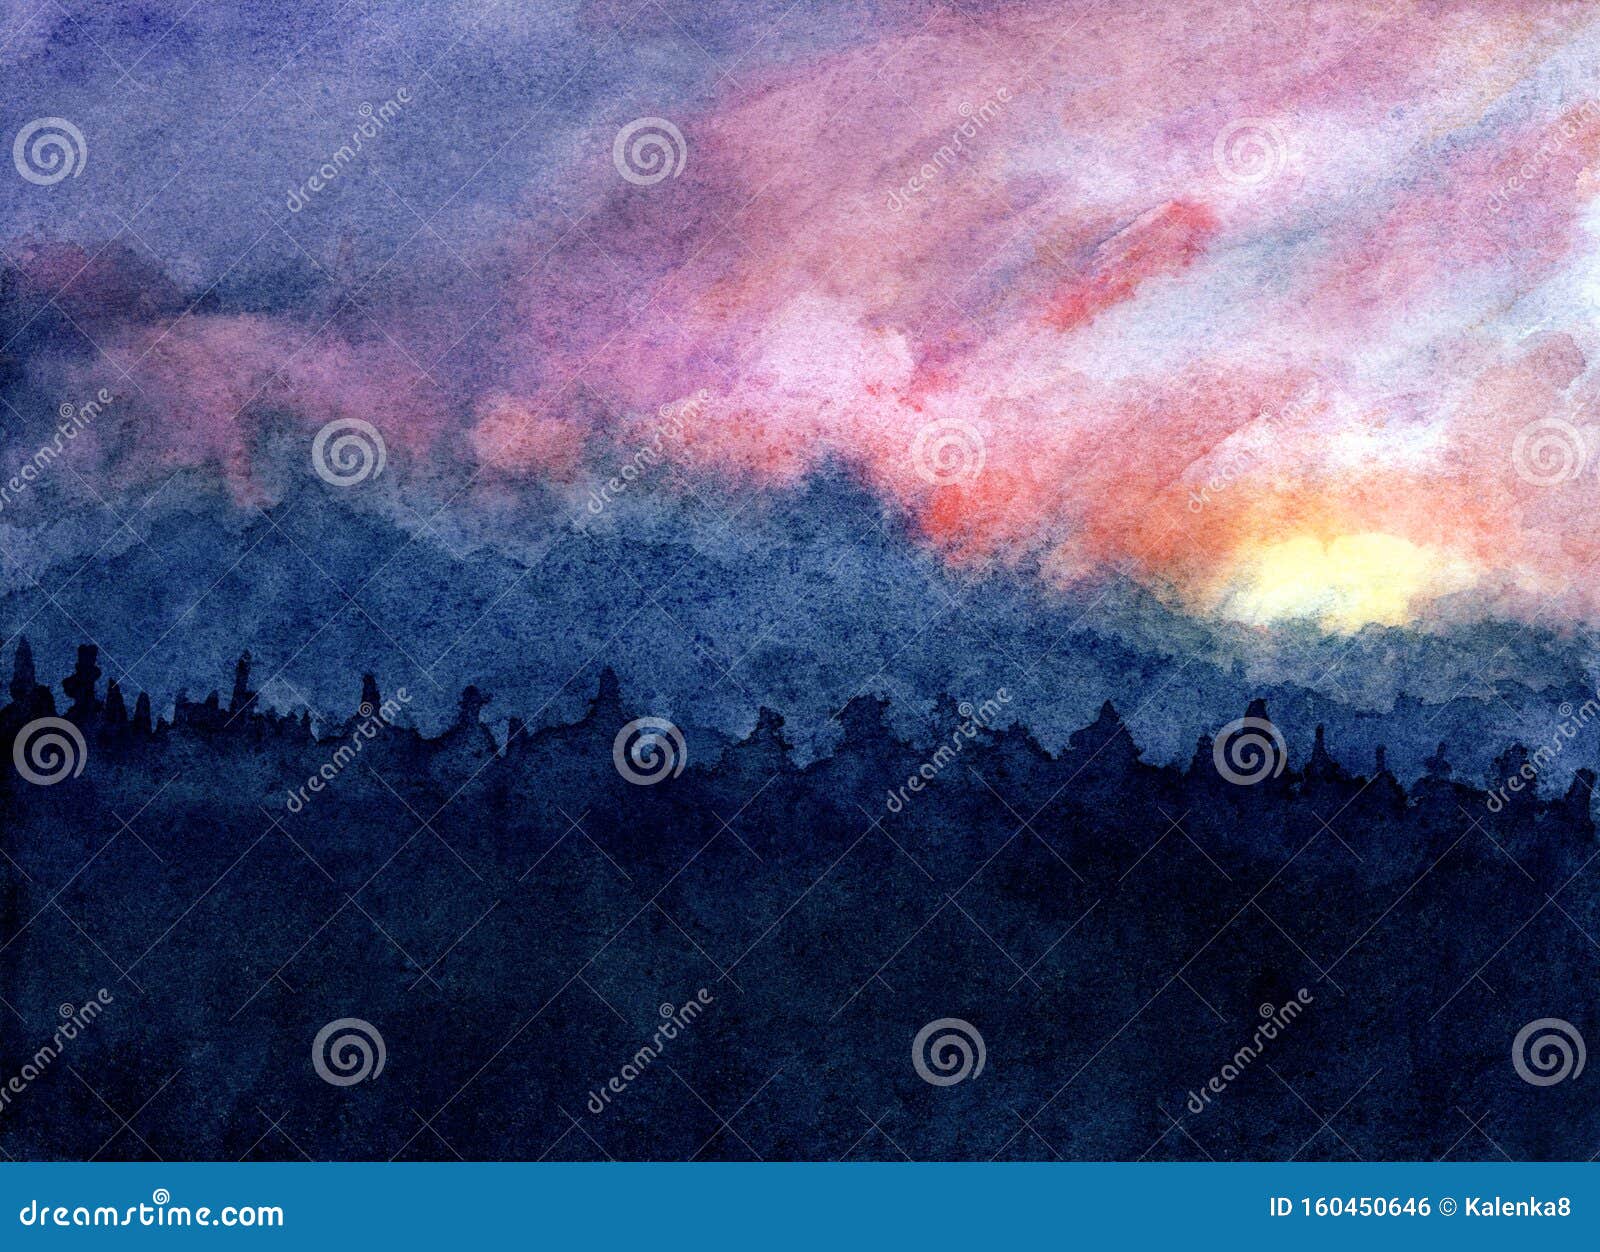 Watercolor Sunset Sky Background Watercolor Abstract Landscape At Sunset Or Sunrise Painted Illustration Of Evening Or Morning Stock Illustration Illustration Of Water Sunrise